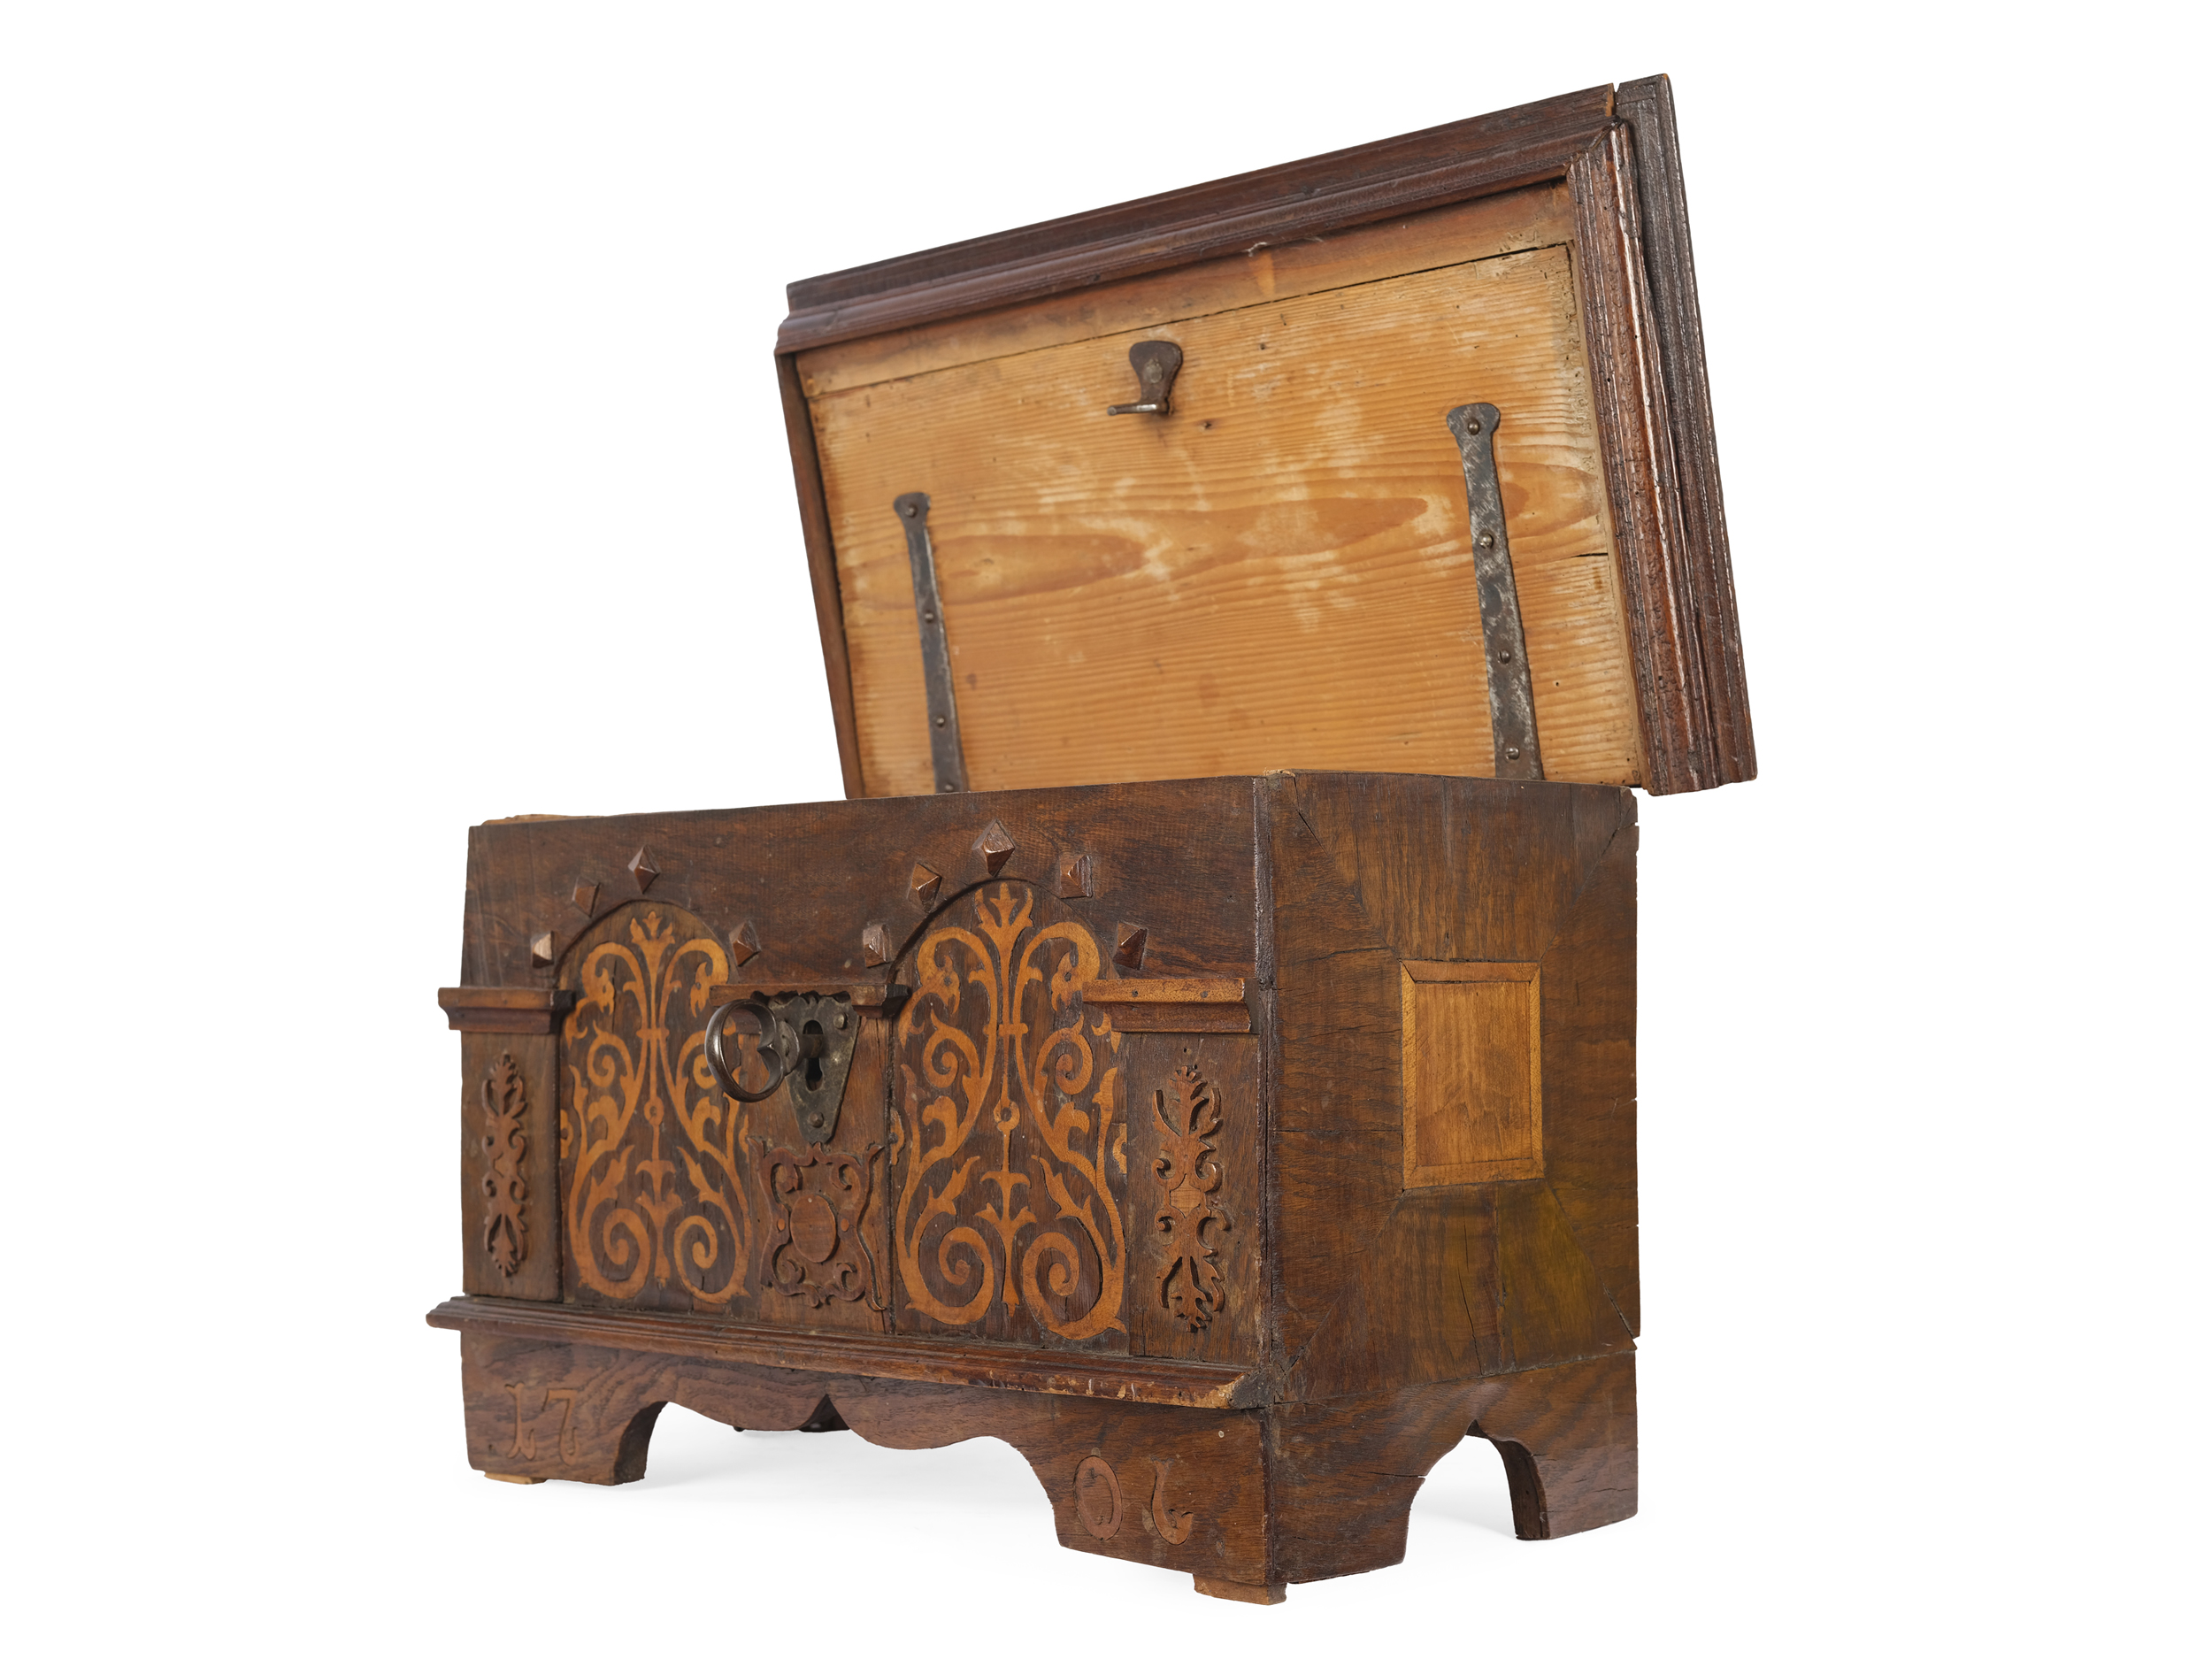 Small chest, alpine, dated 1706 - Image 3 of 5